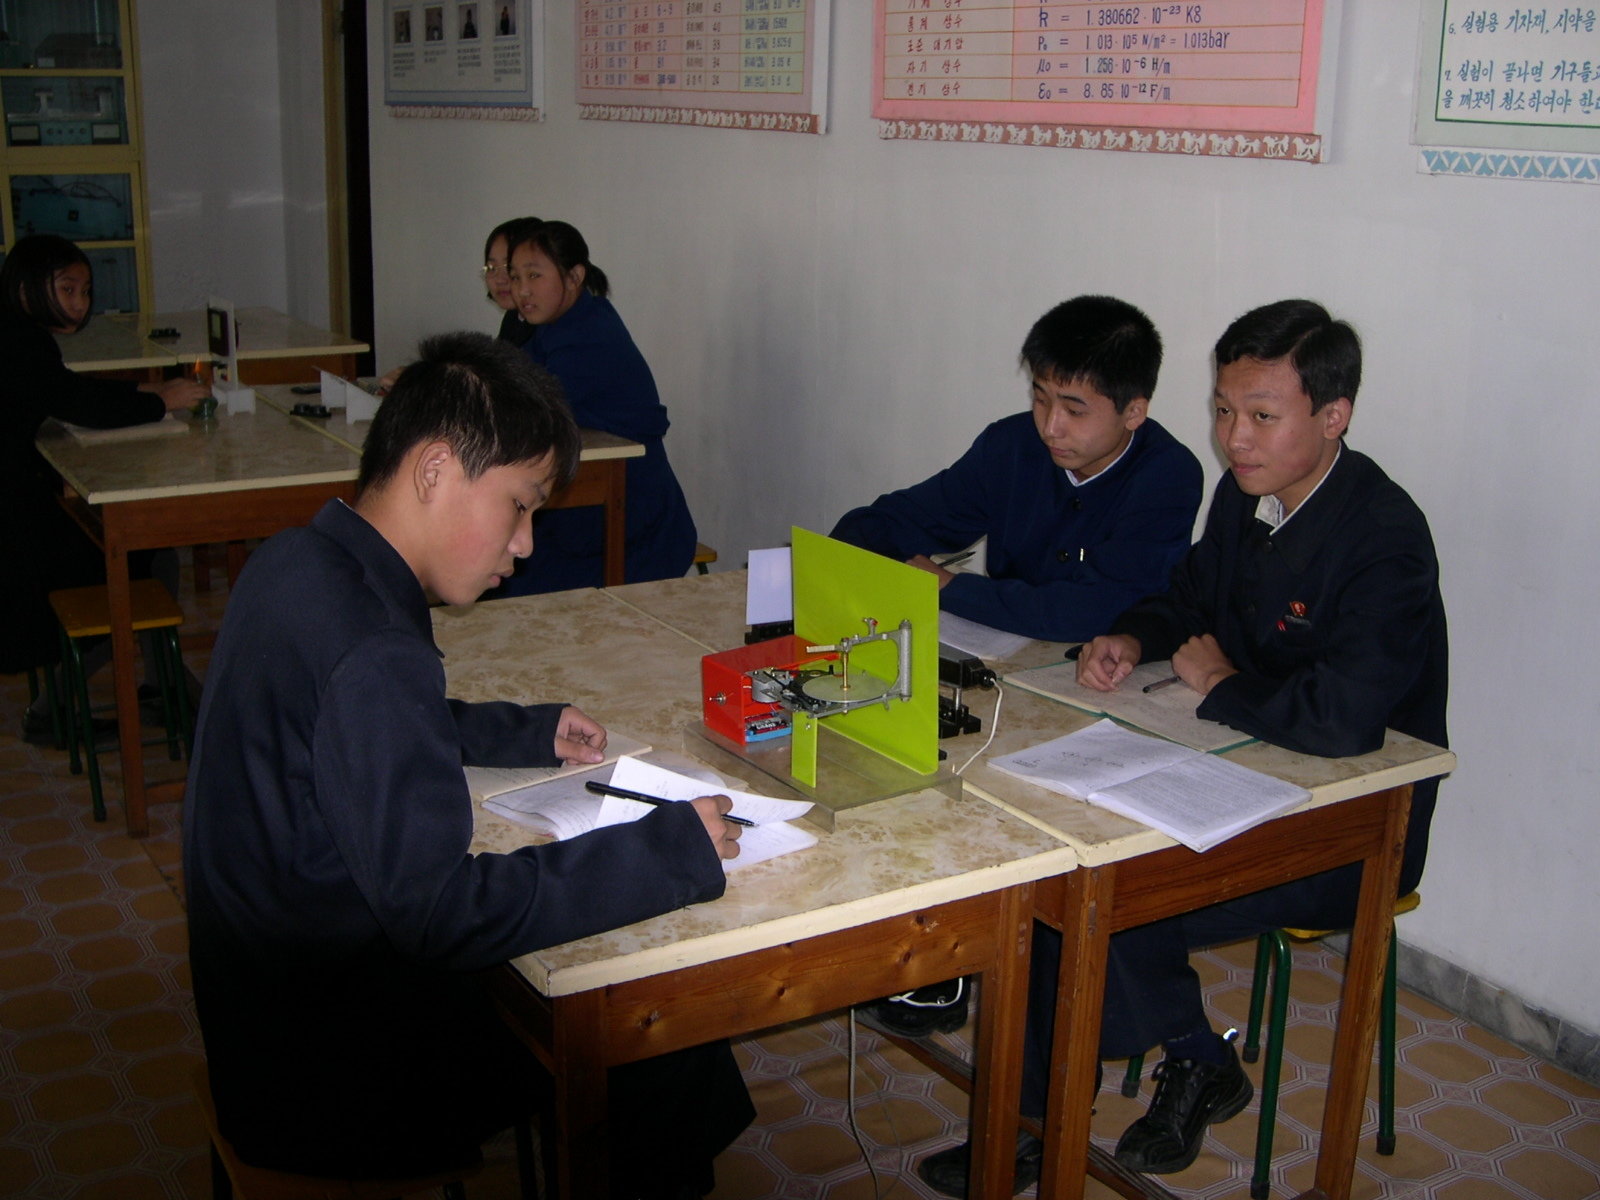 Three uniformed students at a desk busy with a physics tabletop installation.